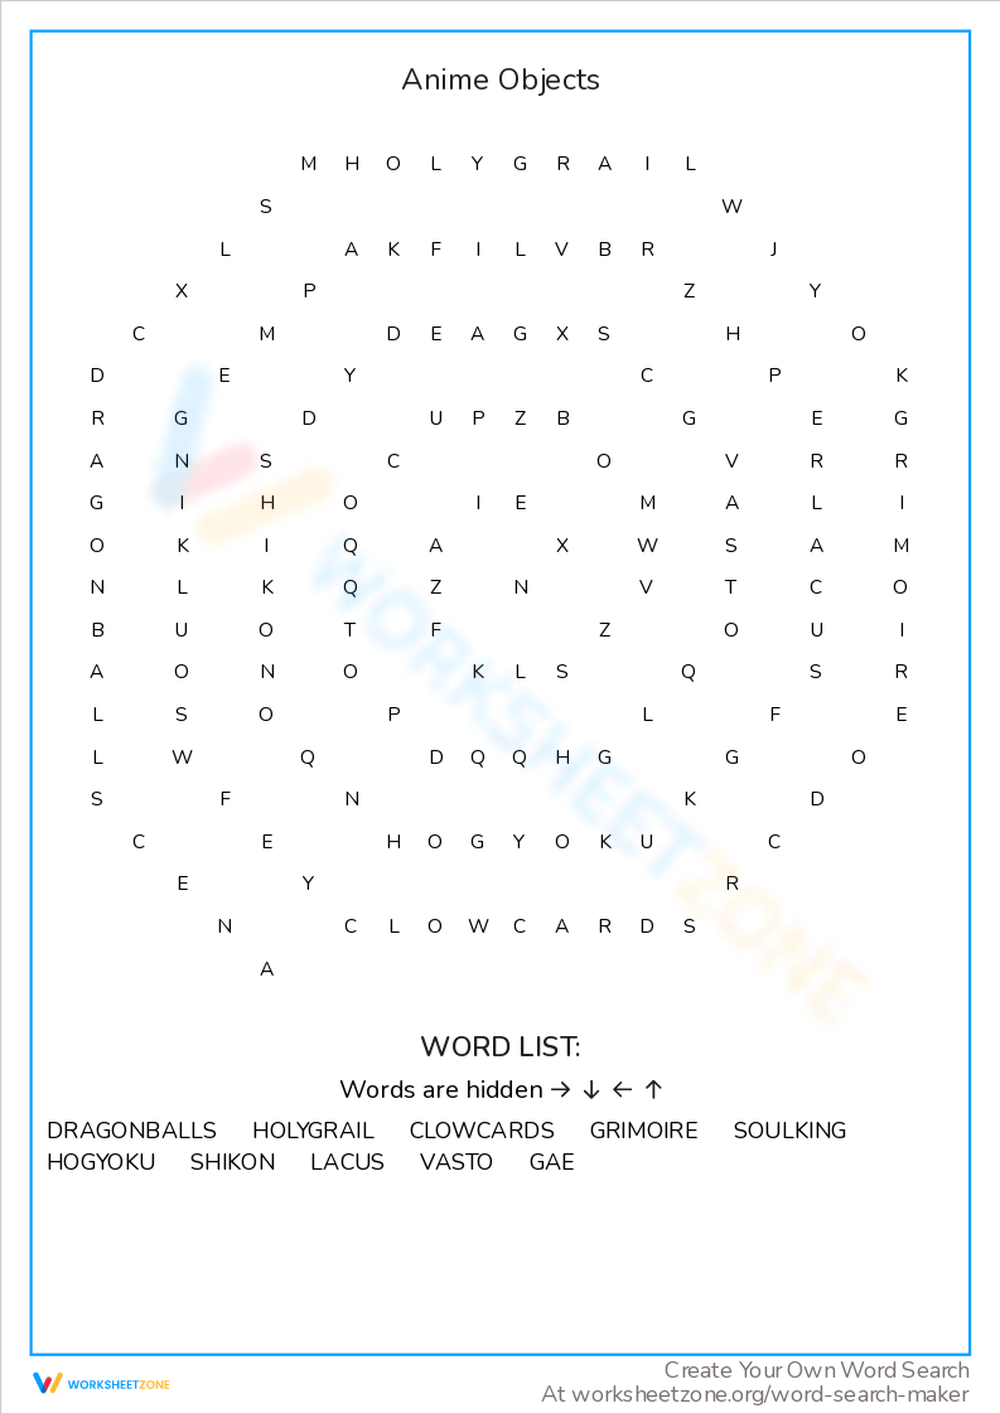 Anime for Teens Word Search - Hard - Logic Lovely